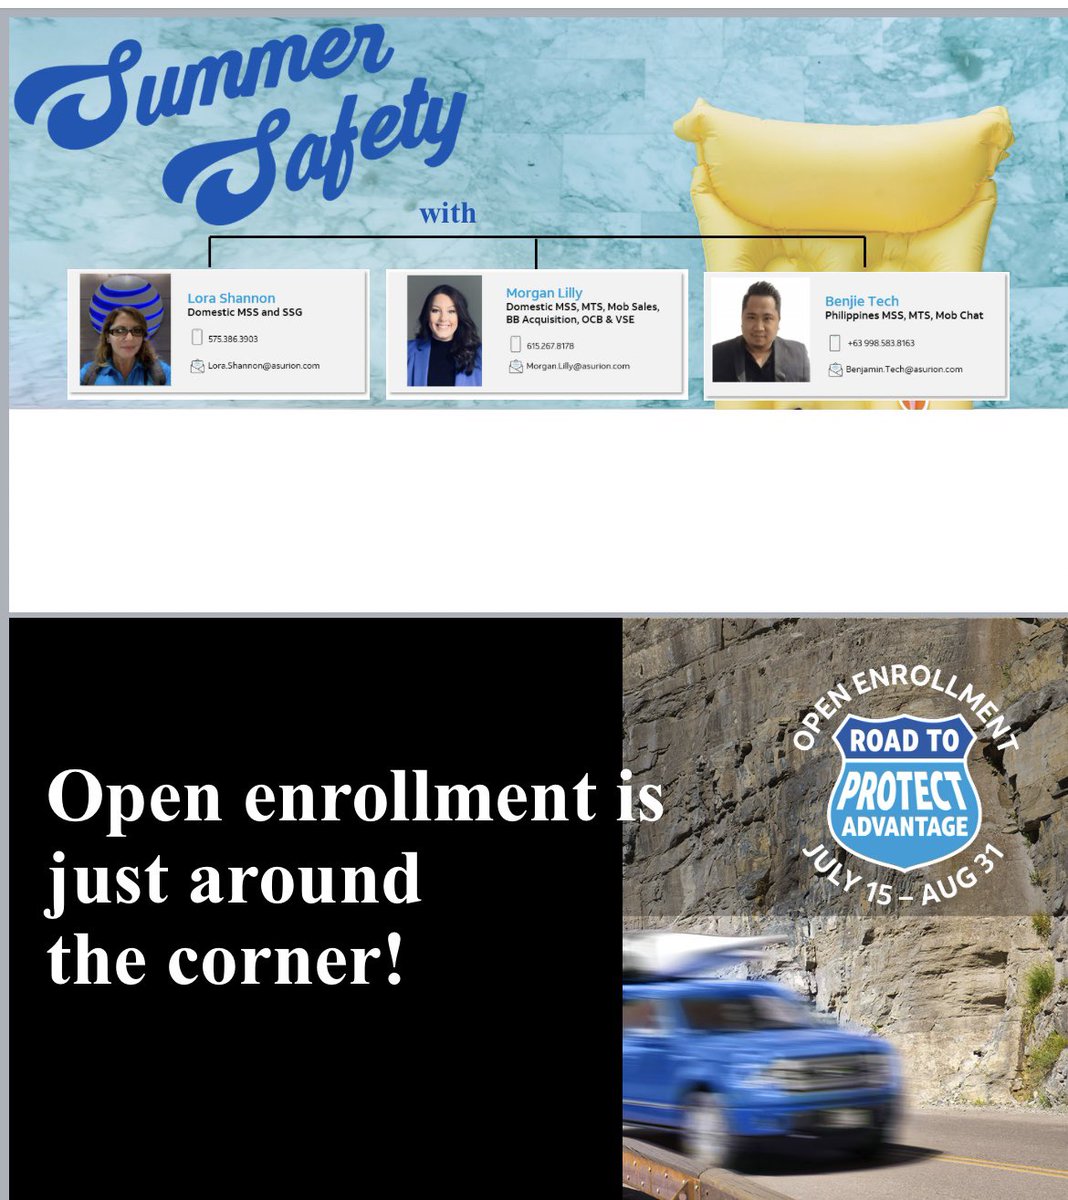 Open Enrollment is right around the corner folks📣📣📣
July 15-August 31 
Who’s ready to earn some FAME points!?! 
@guinn_zack @LatricebMSS @zubiatecassie #openenrollment #LifeatAtt #Bartonsbest